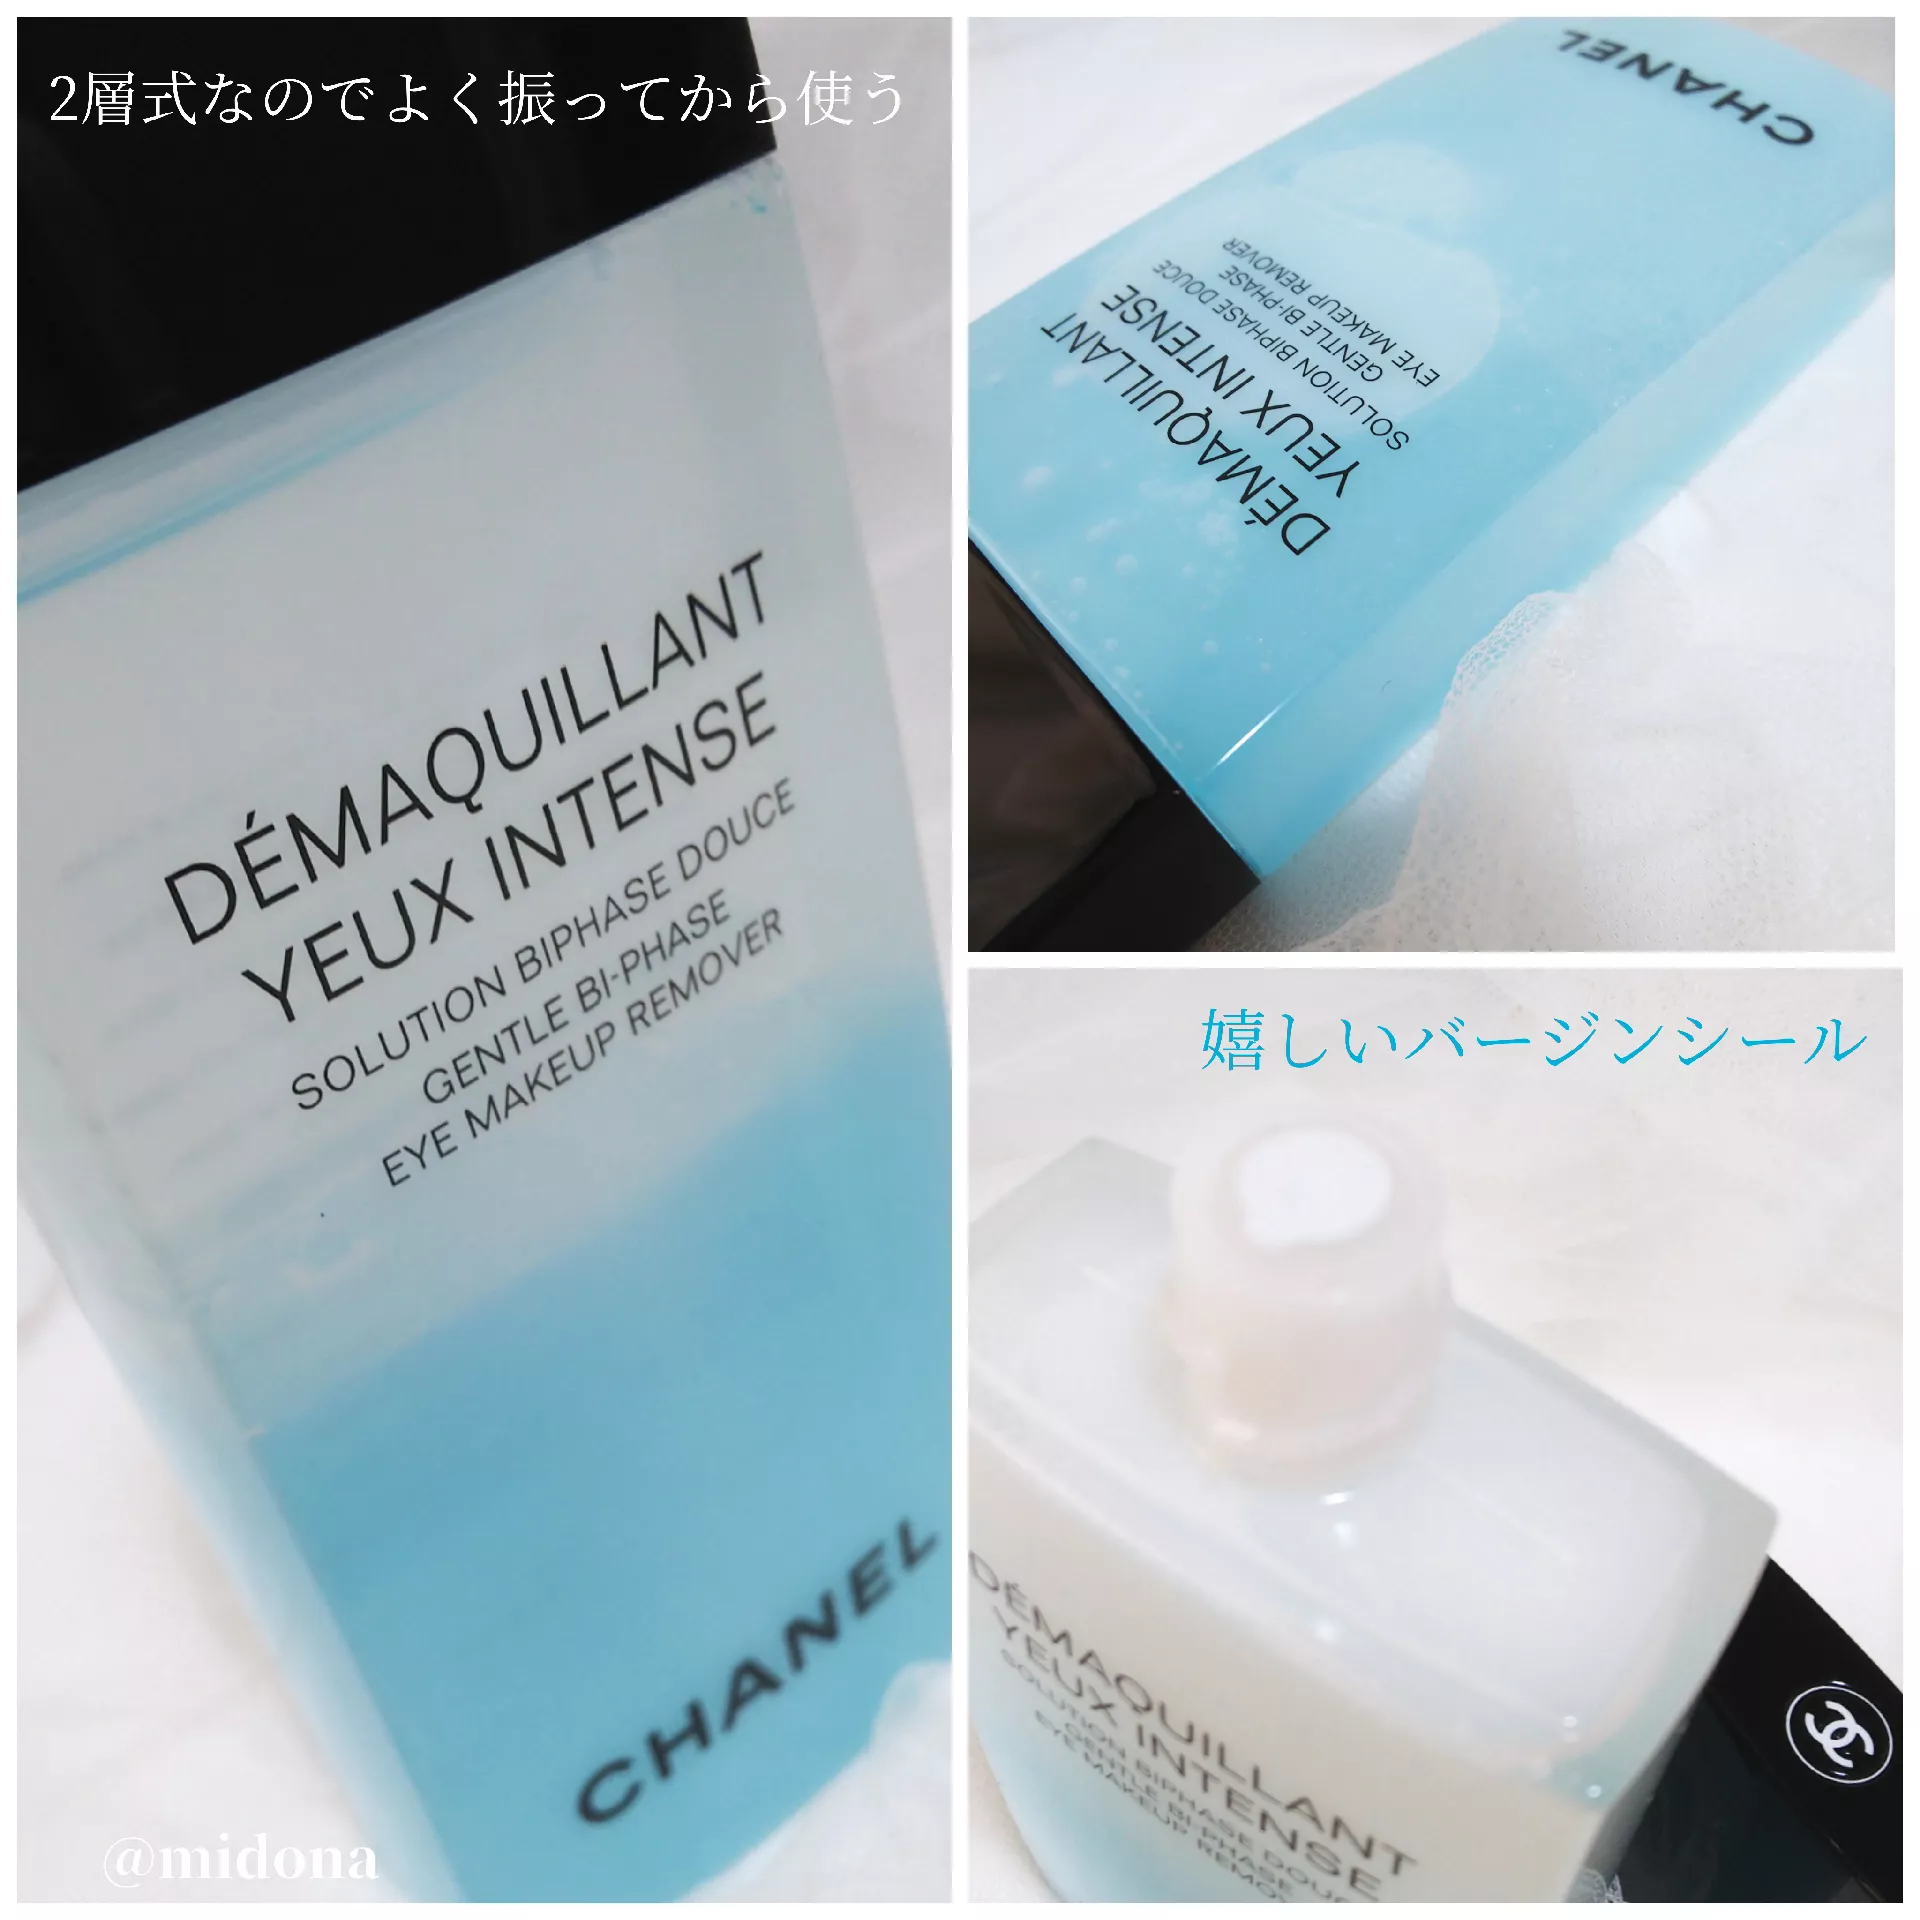 Do you use point makeup remover? CHANEL remover is renewed